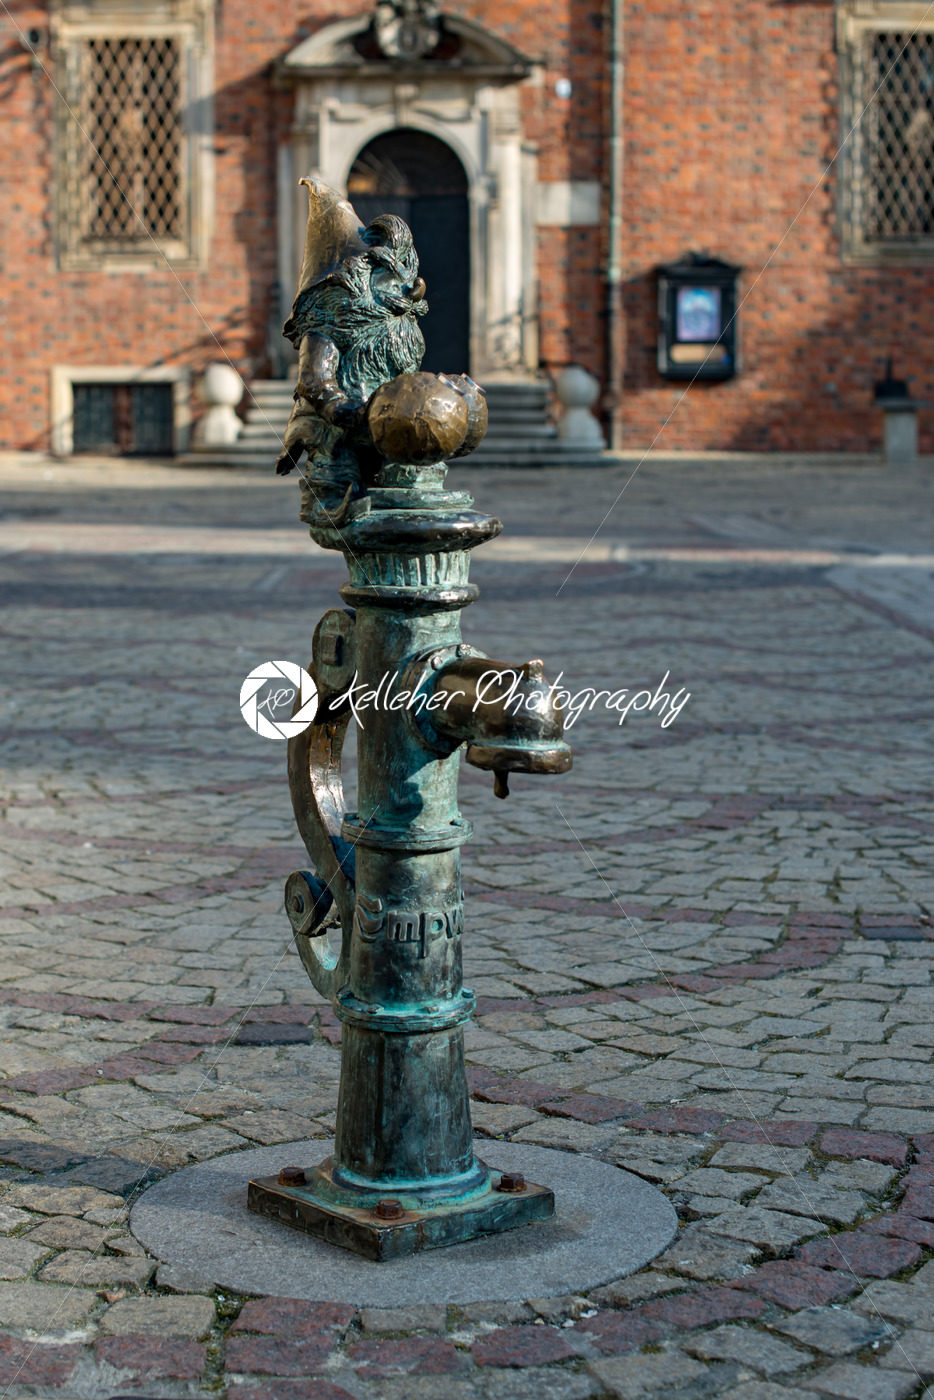 Wroclaw, Poland – March 4, 2018: Gnome on water pipe Wroclaw Market Square in evening in historic capital of Silesia, Poland, Europe. - Kelleher Photography Store